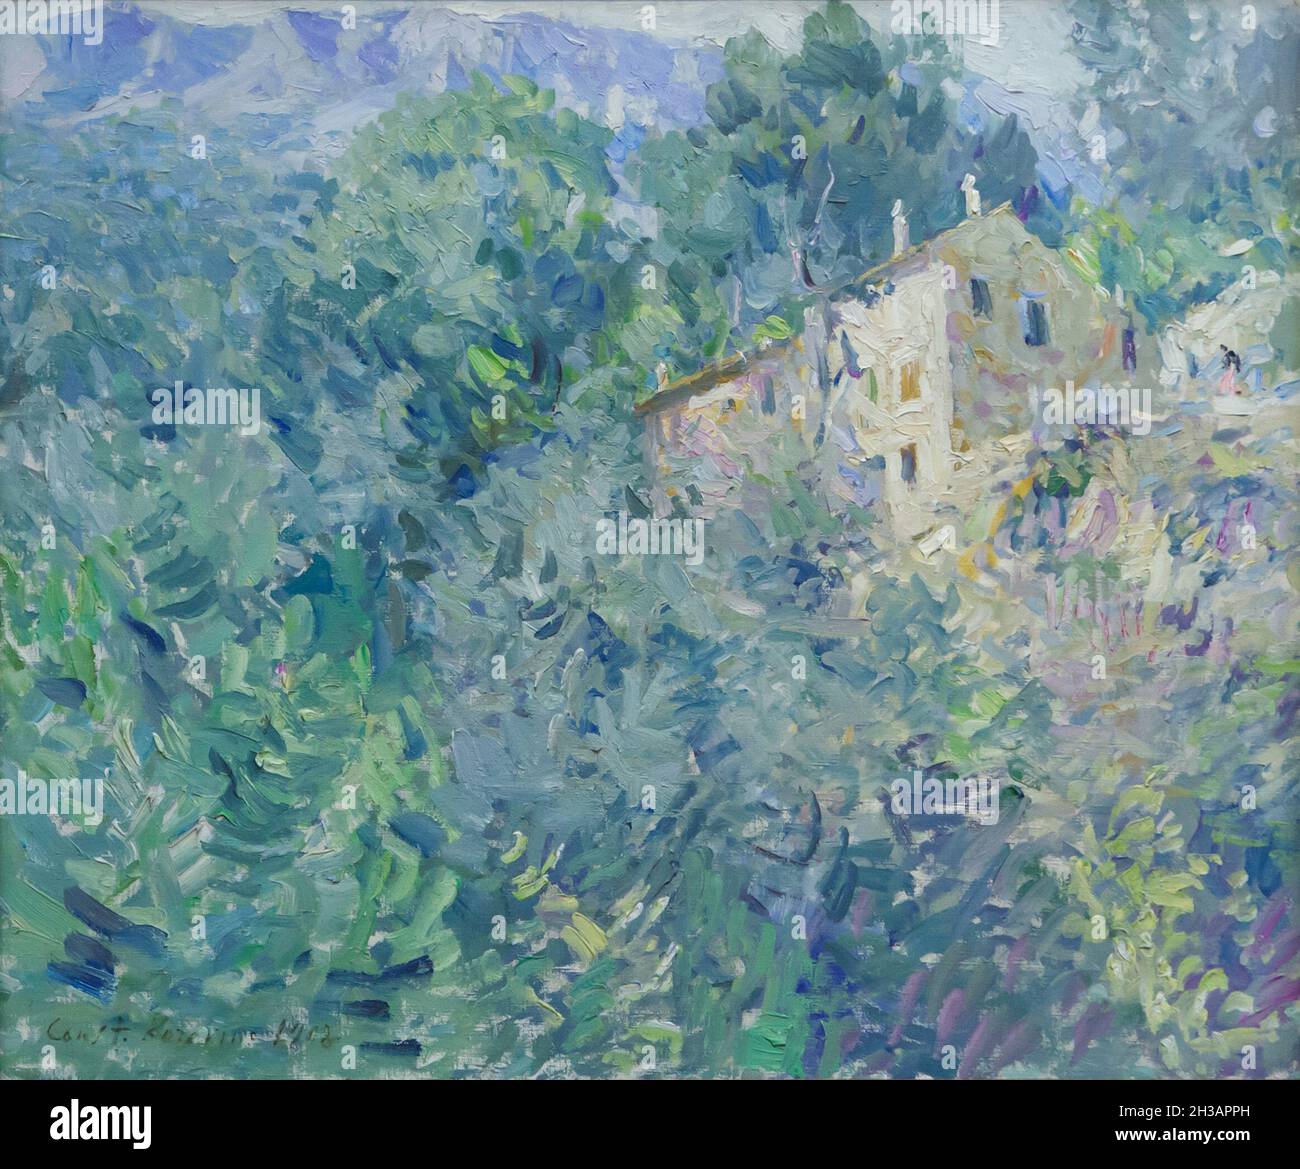 Painting 'In the South of France' by Russian Impressionist painter Konstantin Korovin (1908) on display at the special exhibition devoted to Impressionism in Russia in the Museum Barberini in Potsdam, Germany. The exhibition 'Dawn of the Avant-Garde' runs till 9 January 2022. Stock Photo